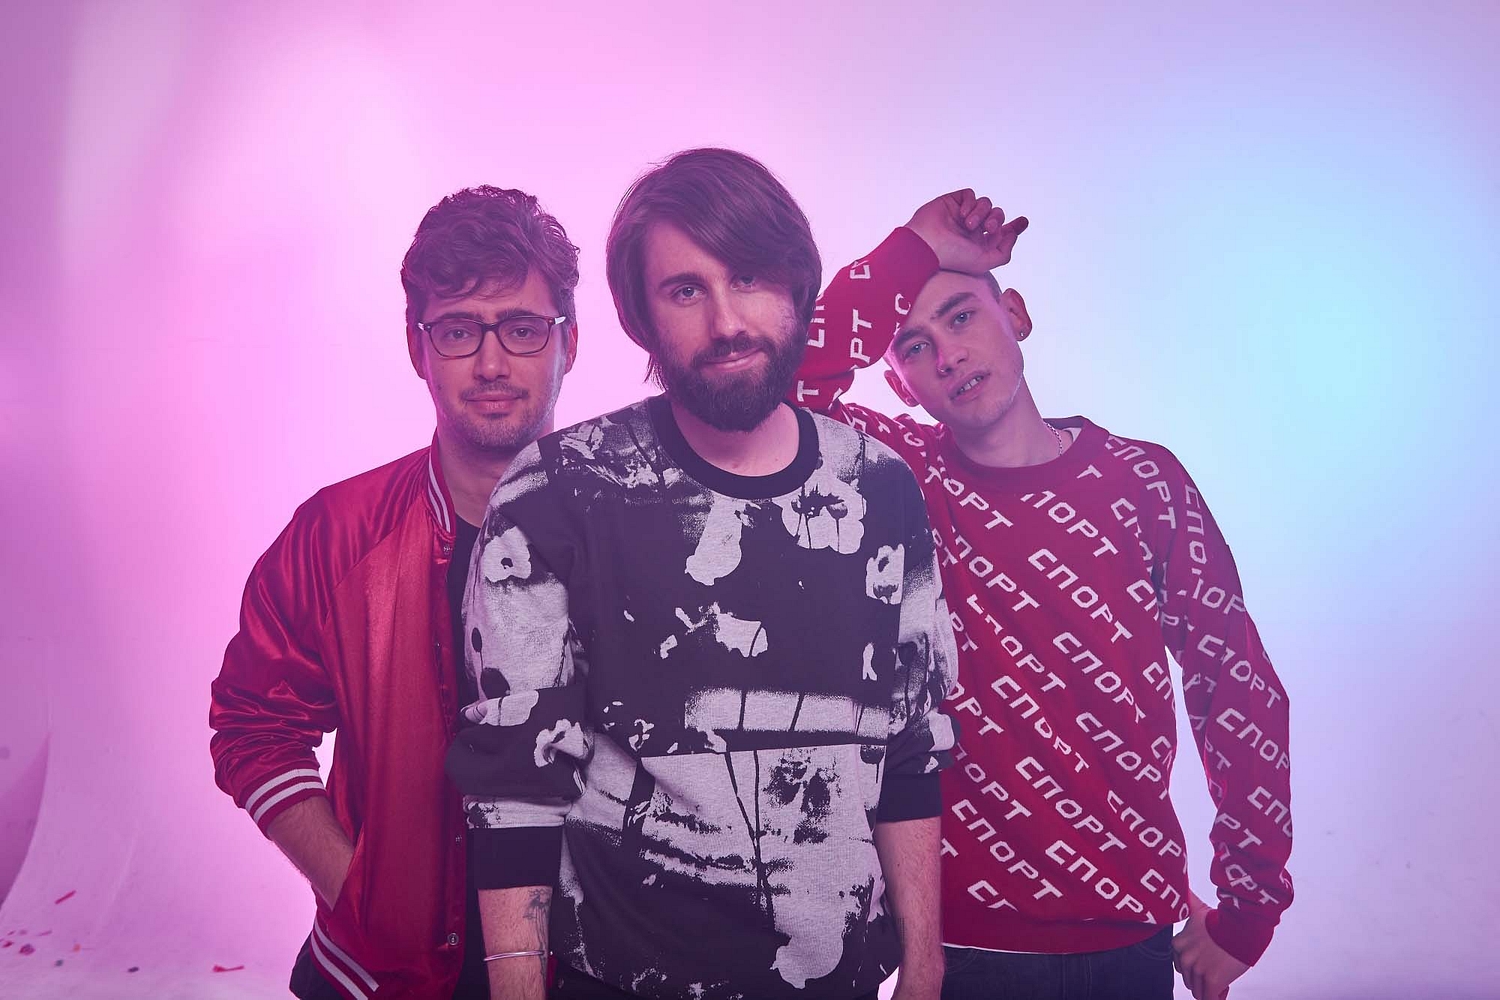 Years & Years: "Everything seemed to come together"